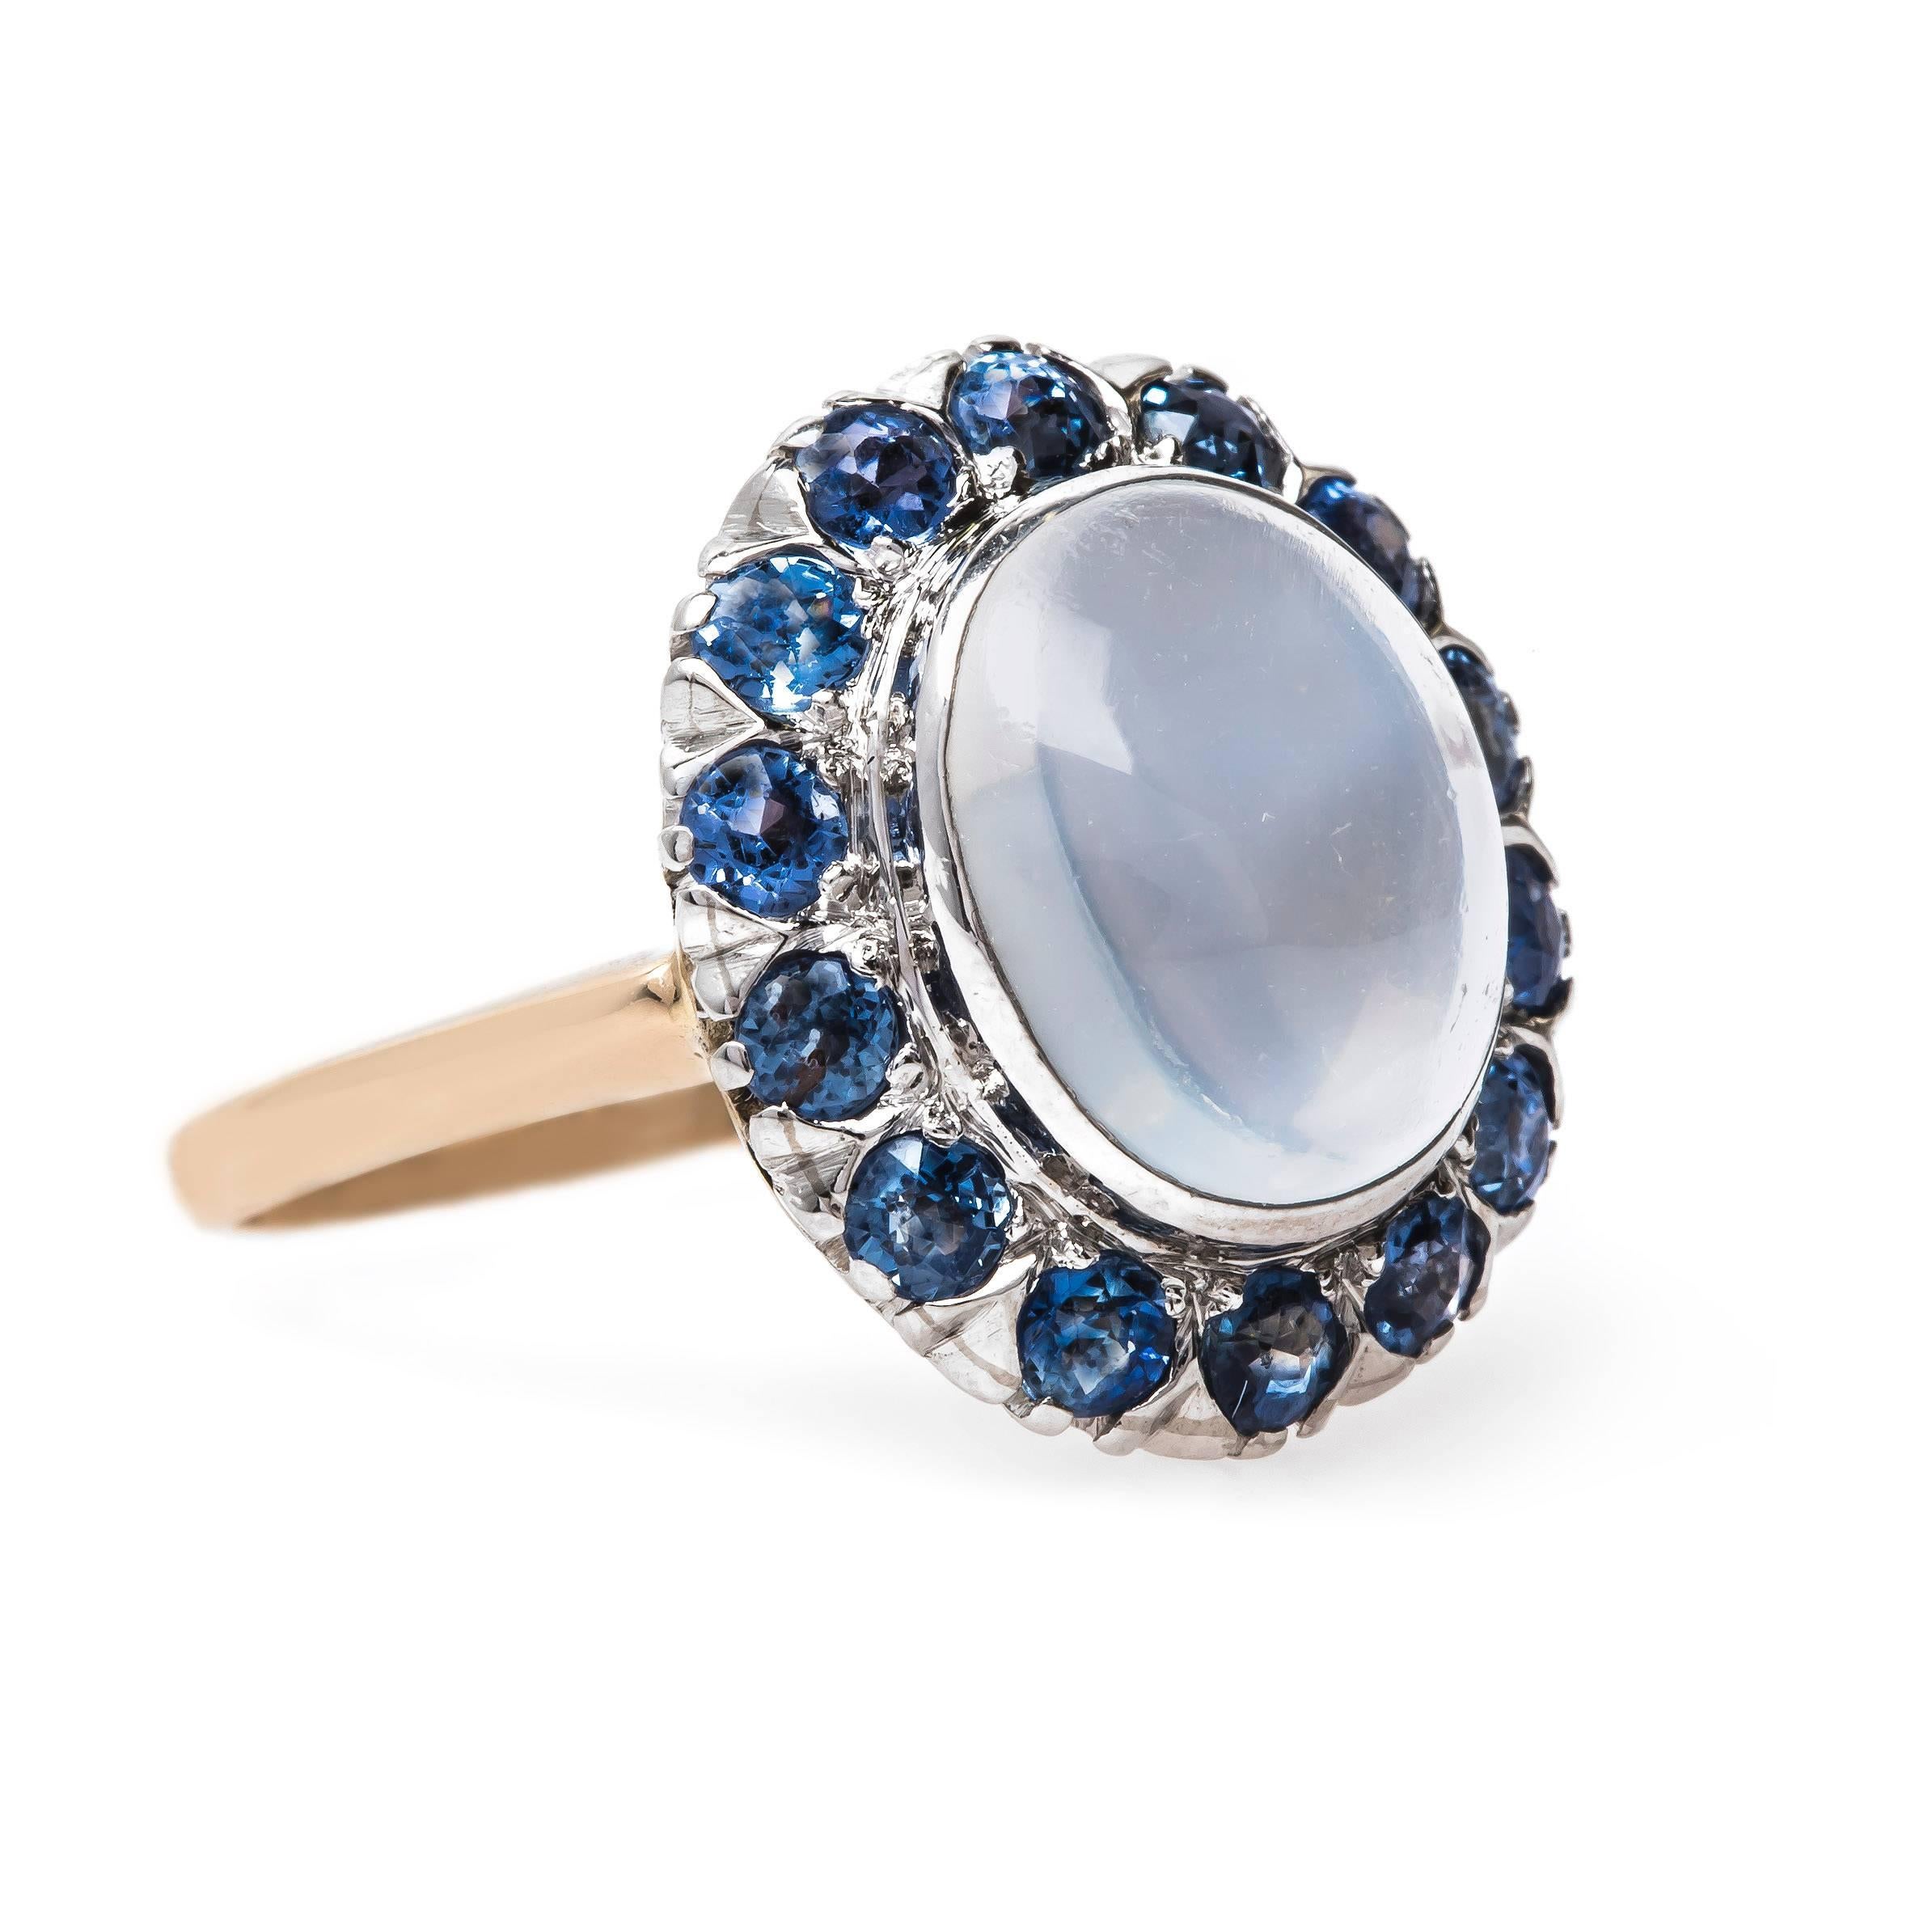 Floriston is an unforgettable Late Art Deco (circa 1935) cocktail ring sure to impress! This one-of-a-kind ring is made from platinum and 14k yellow gold centering a dreamy bezel set Oval Cabochon moonstone gauged at 12mm x 10mm with a weight of